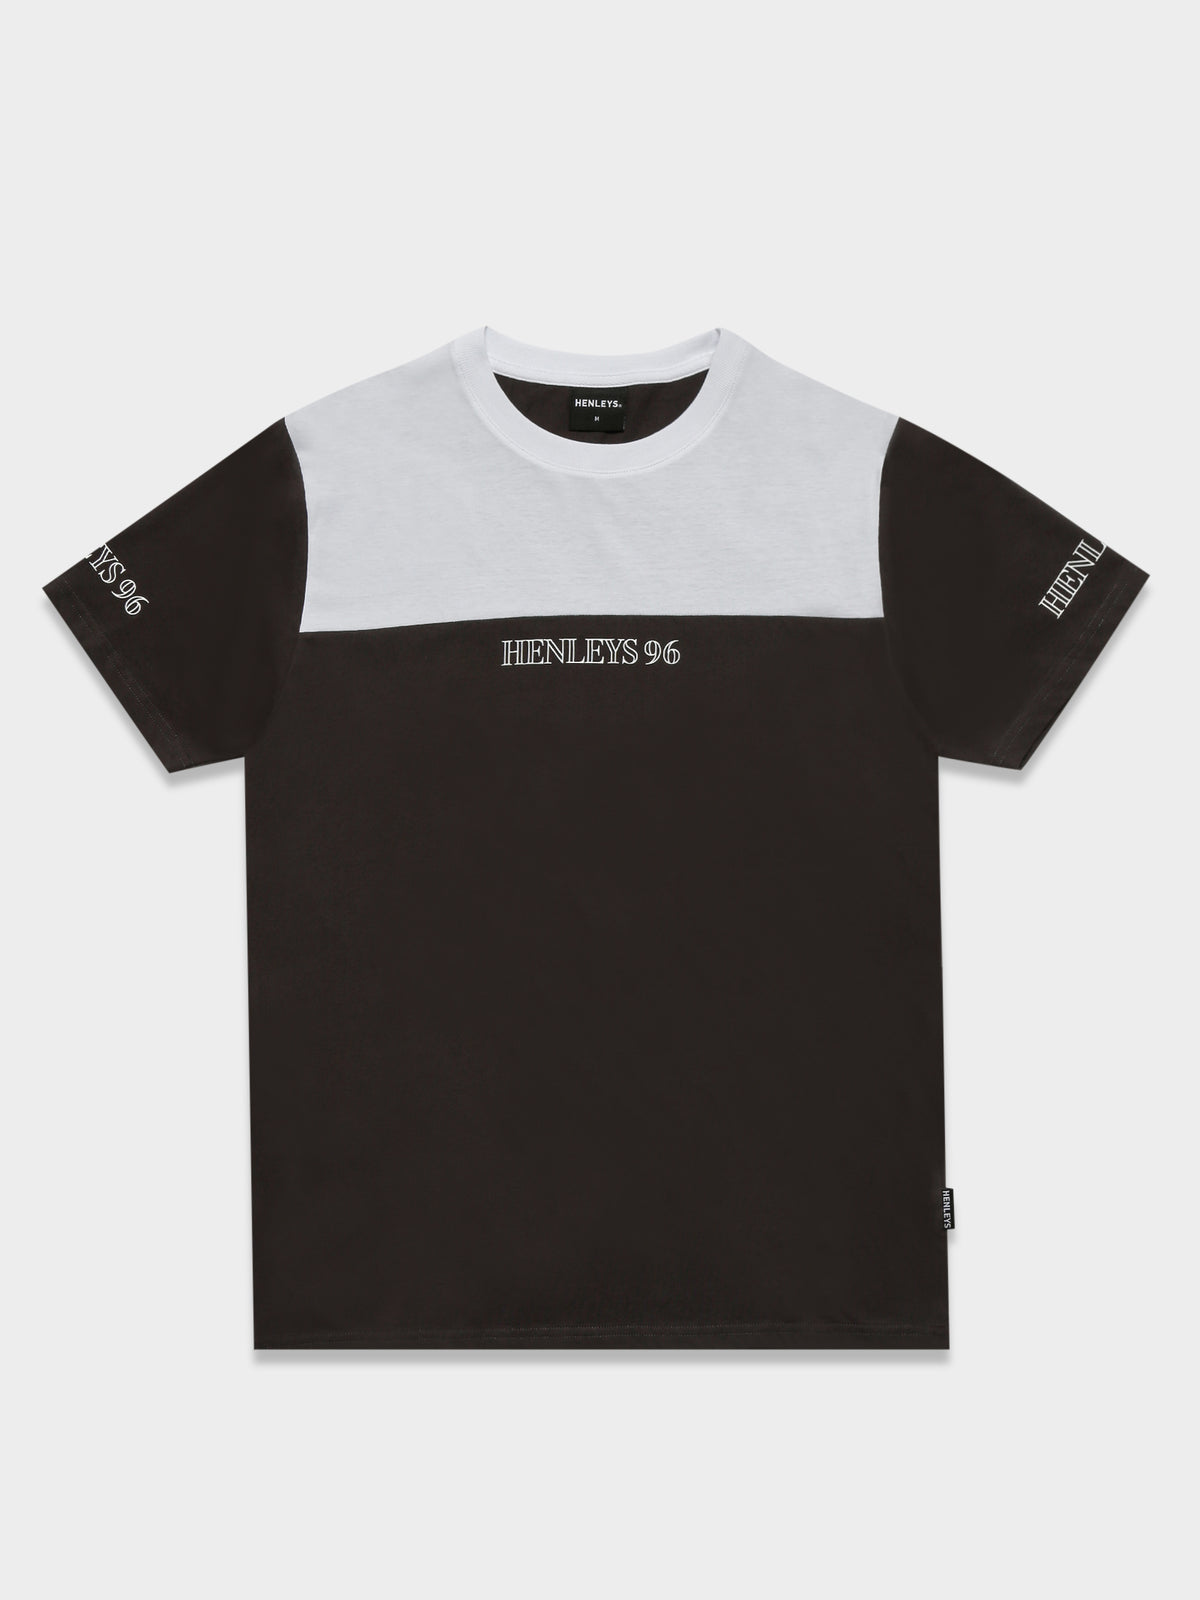 Whistle T-Shirt in Coal